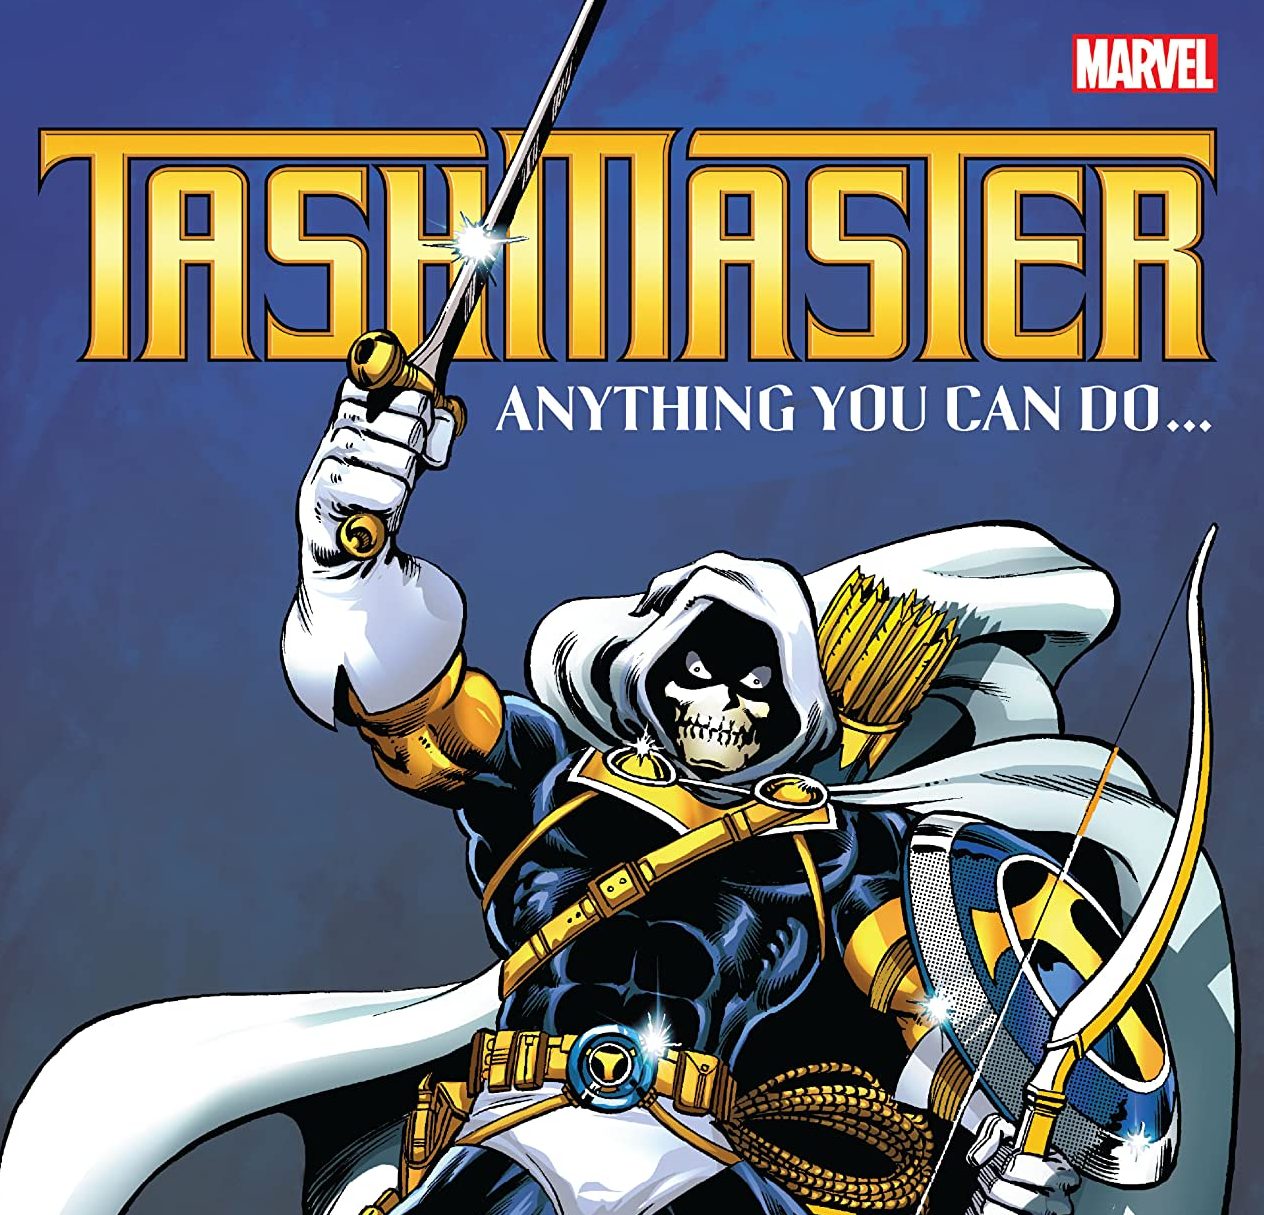 'Taskmaster: Anything You Can Do...' Review